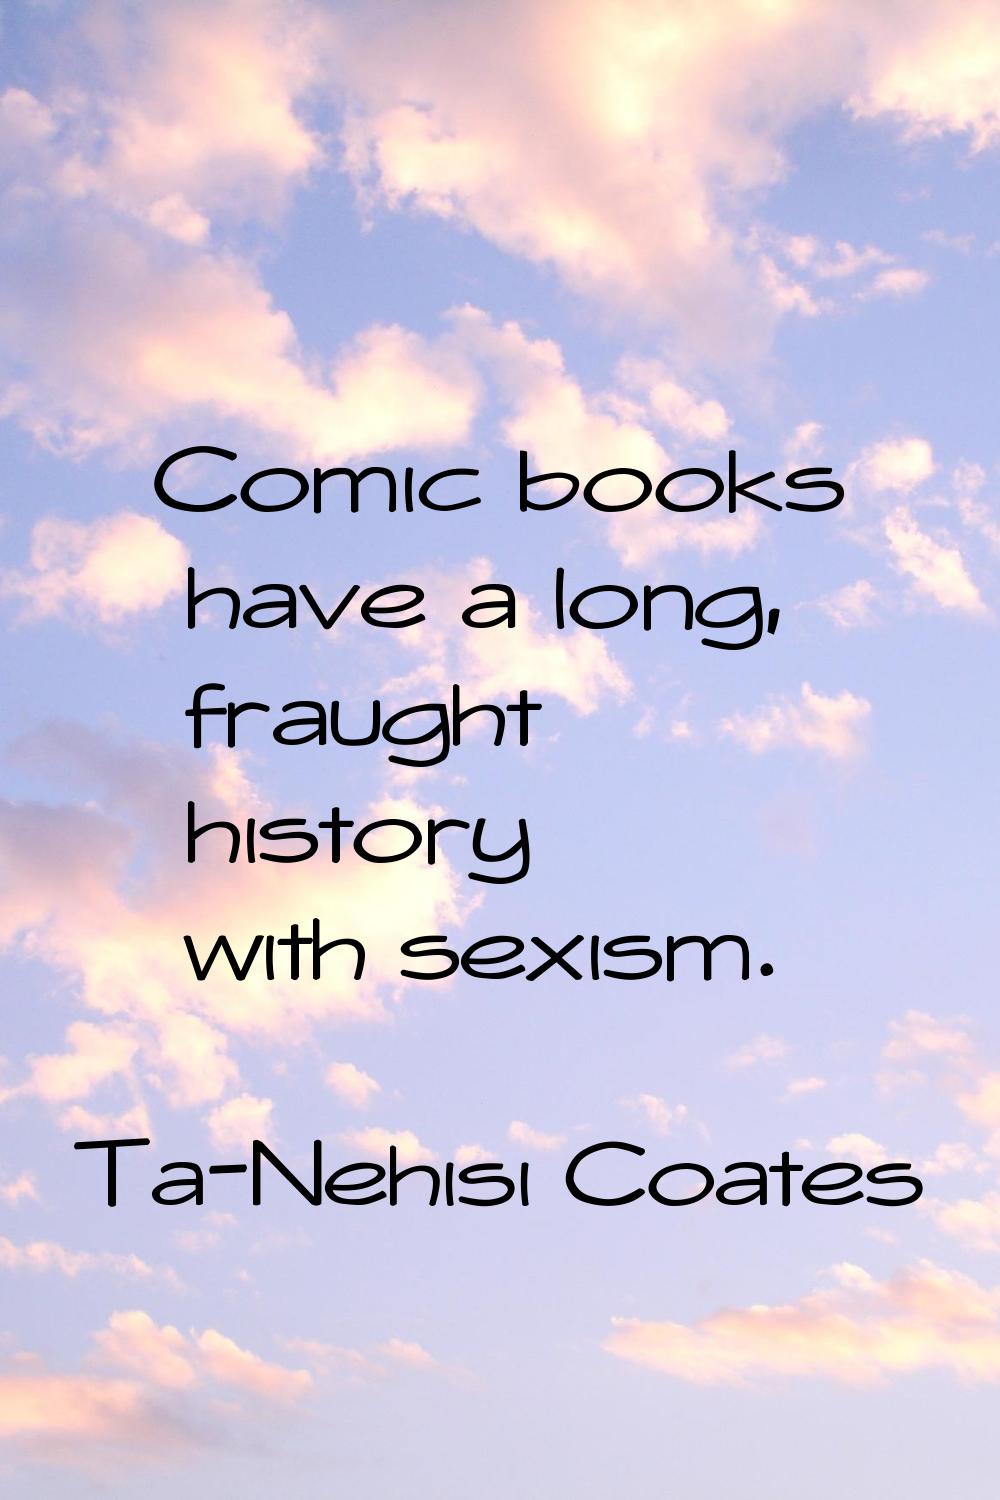 Comic books have a long, fraught history with sexism.